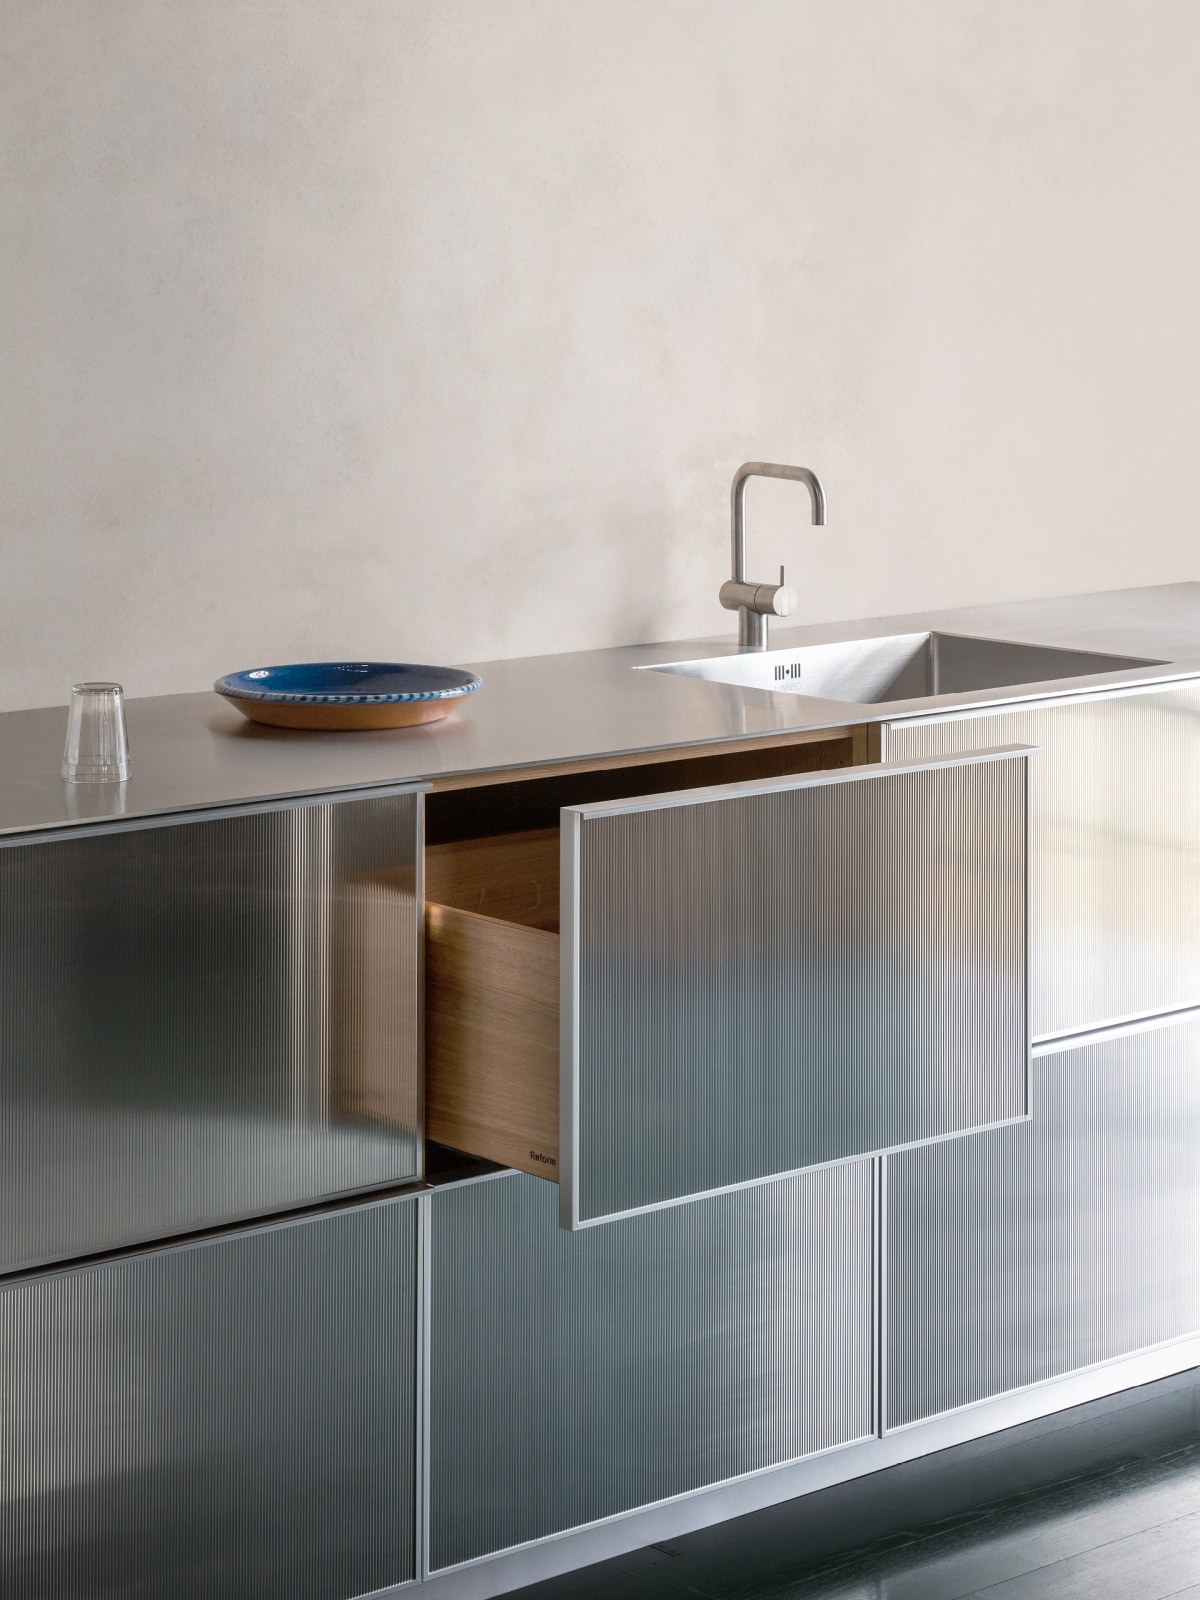 REFLECT kitchen with countertop in stainless steel